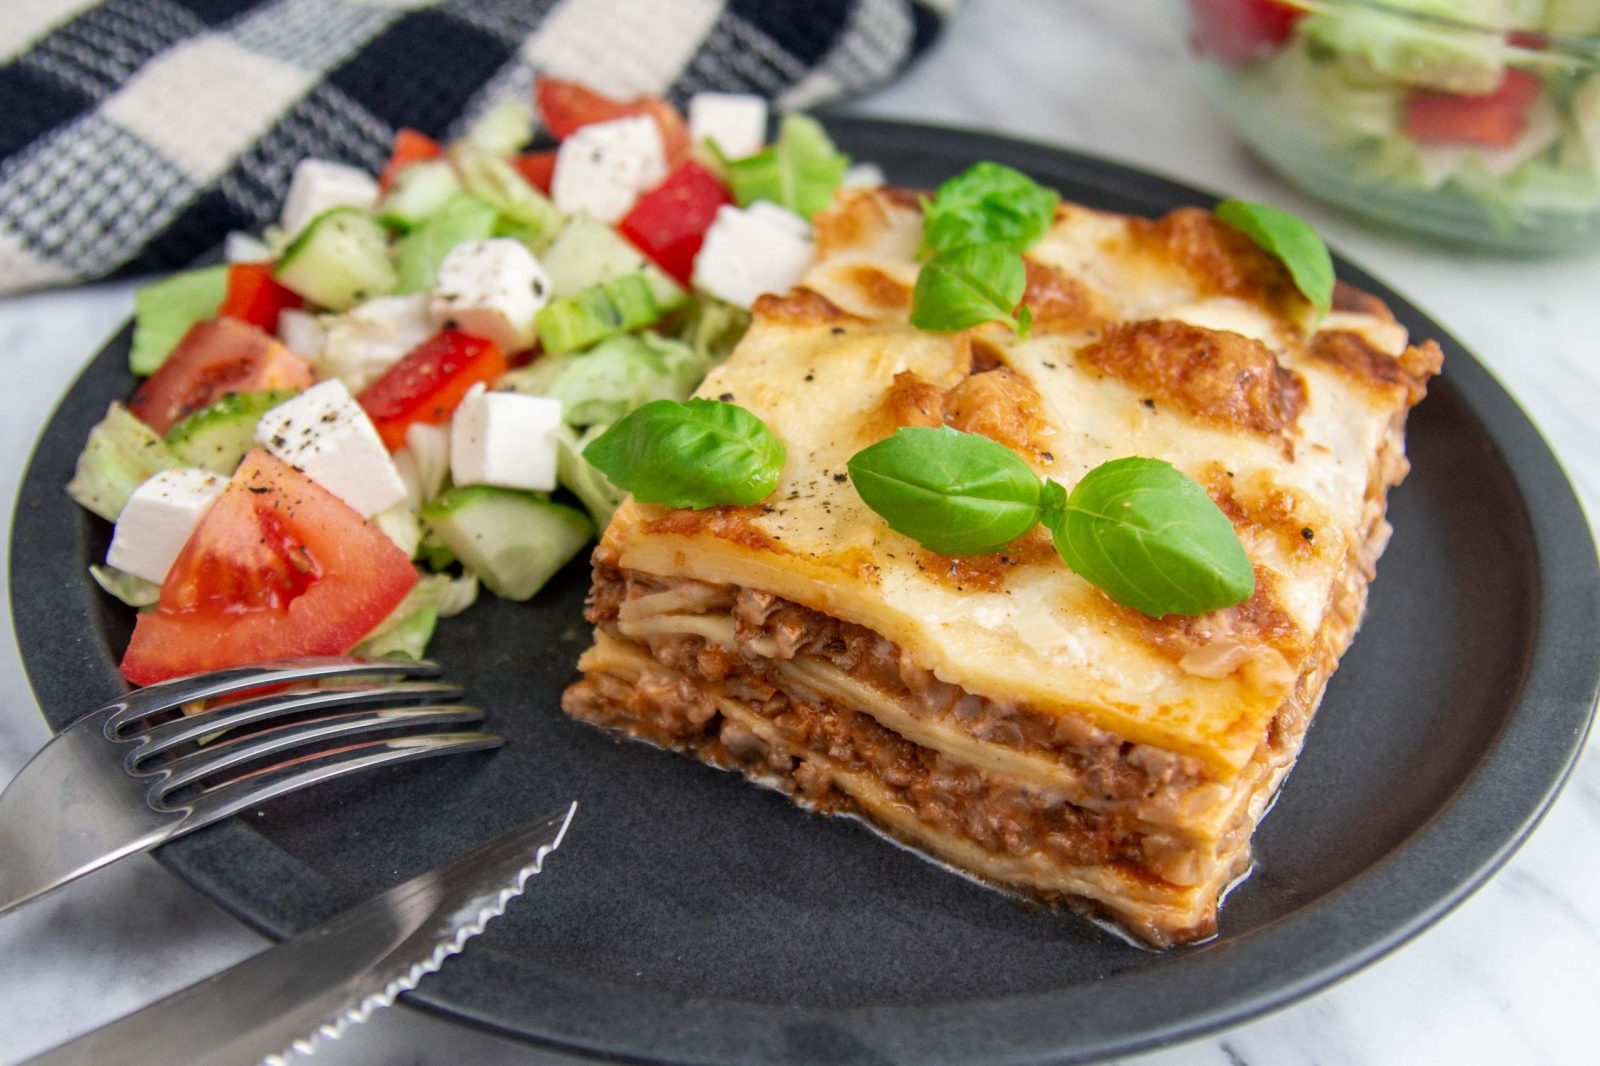 Super quick leftover lasagne with fresh salad – day two